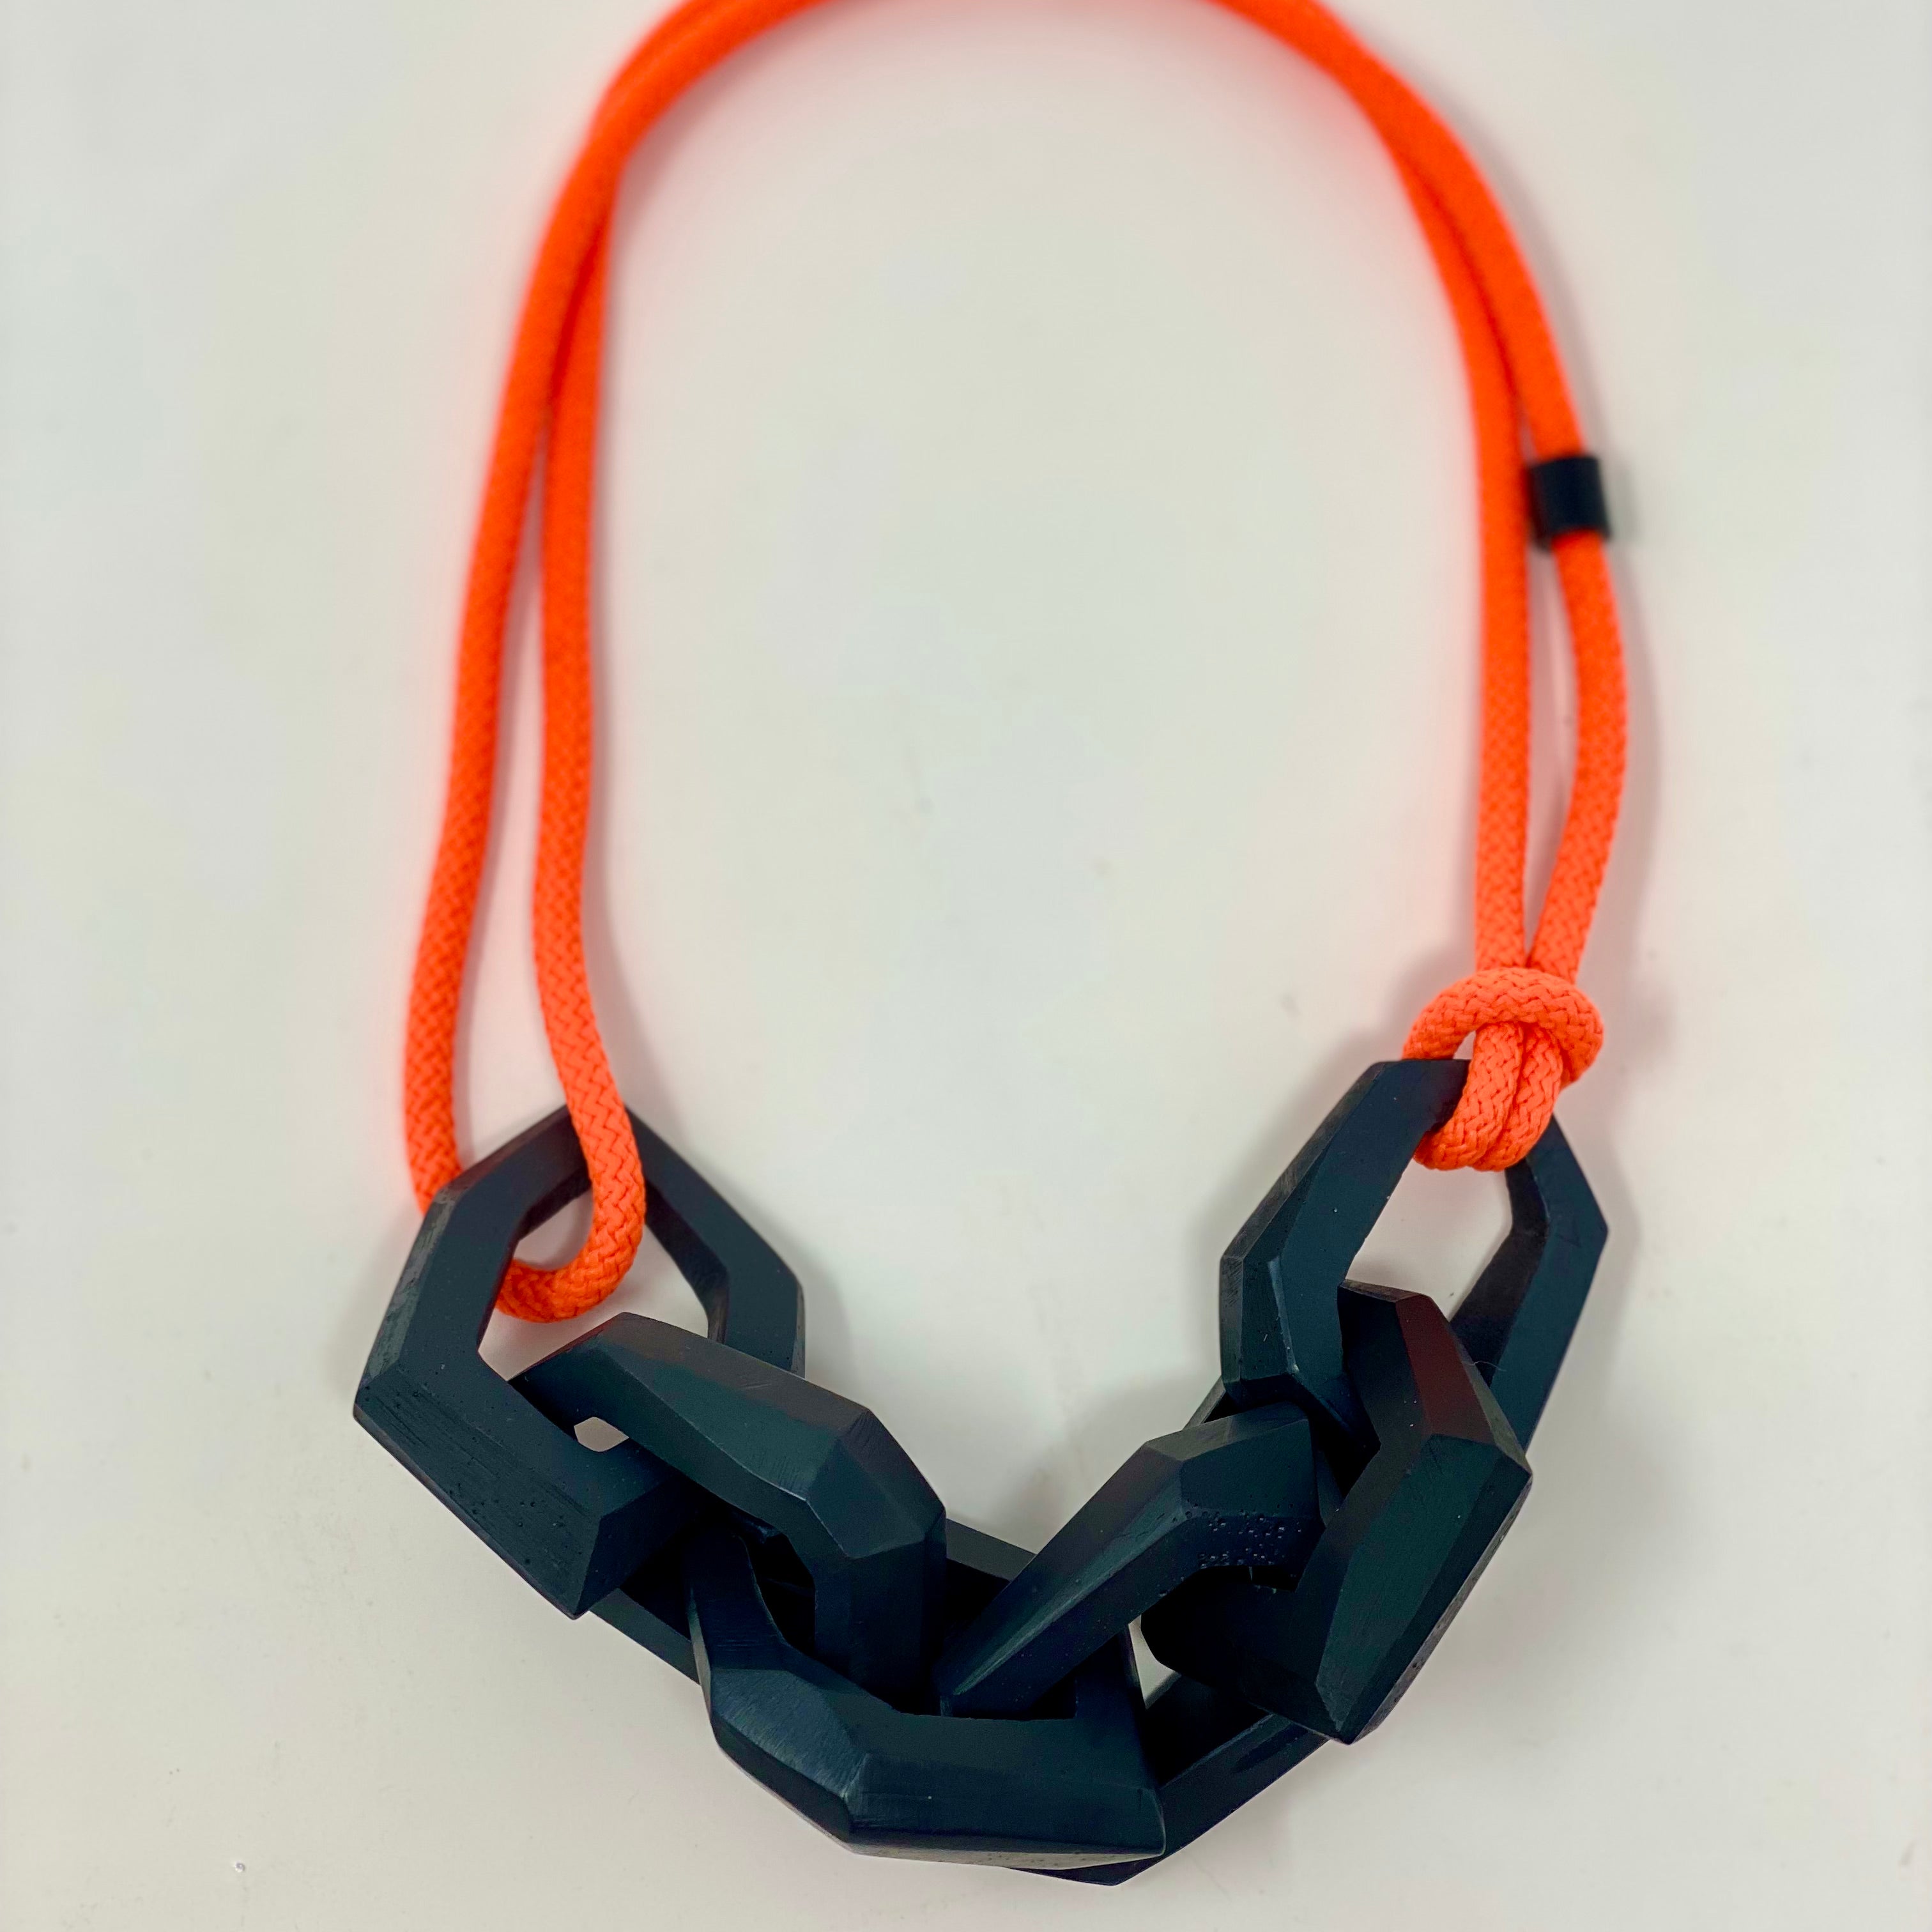 Maca Links Necklace, charcoal and fluro orange